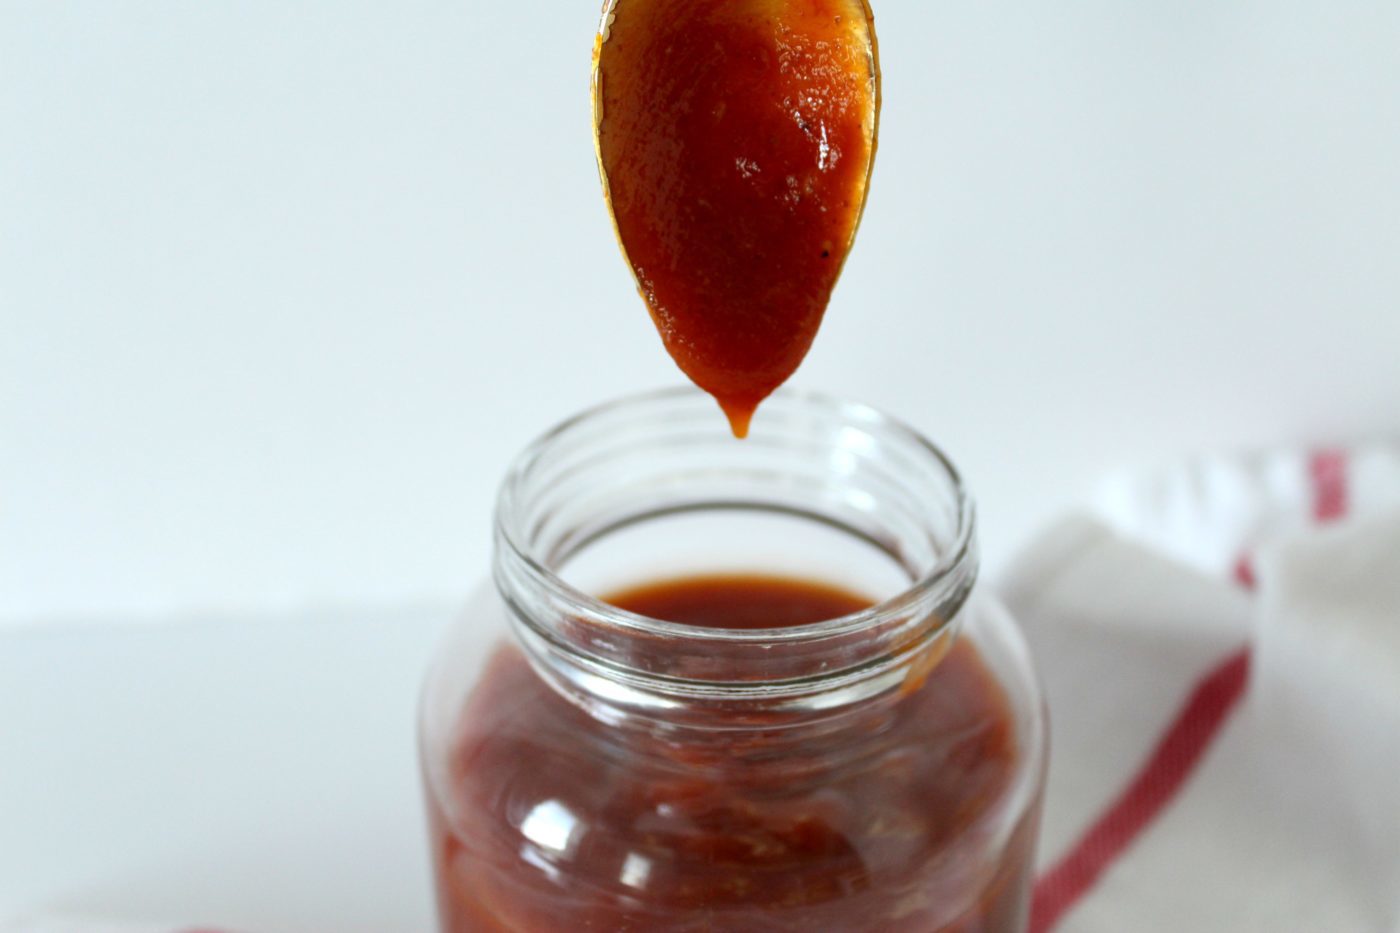 BBQ sauce is a condiment favorite that many don't make from scratch; let's change that.